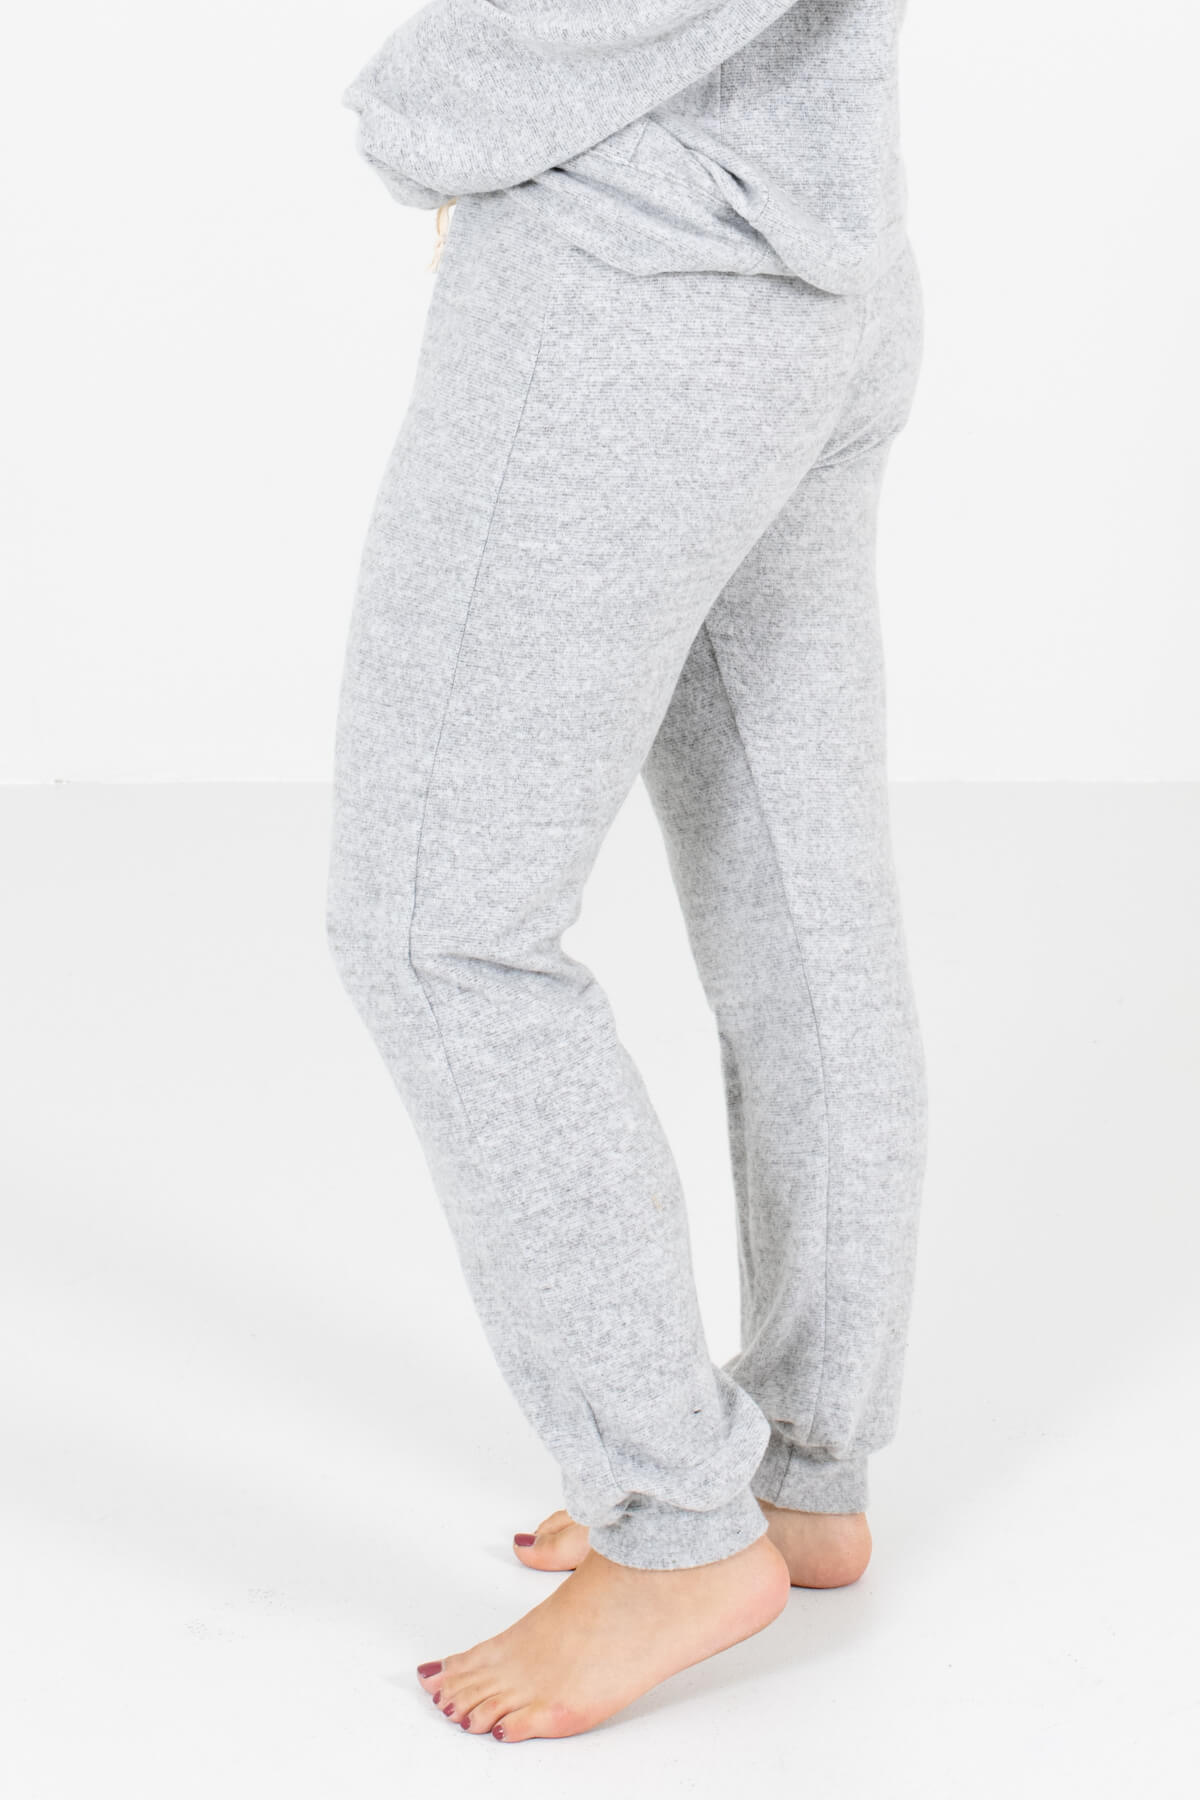 Heather Gray Soft and Stretchy Boutique Joggers for Women